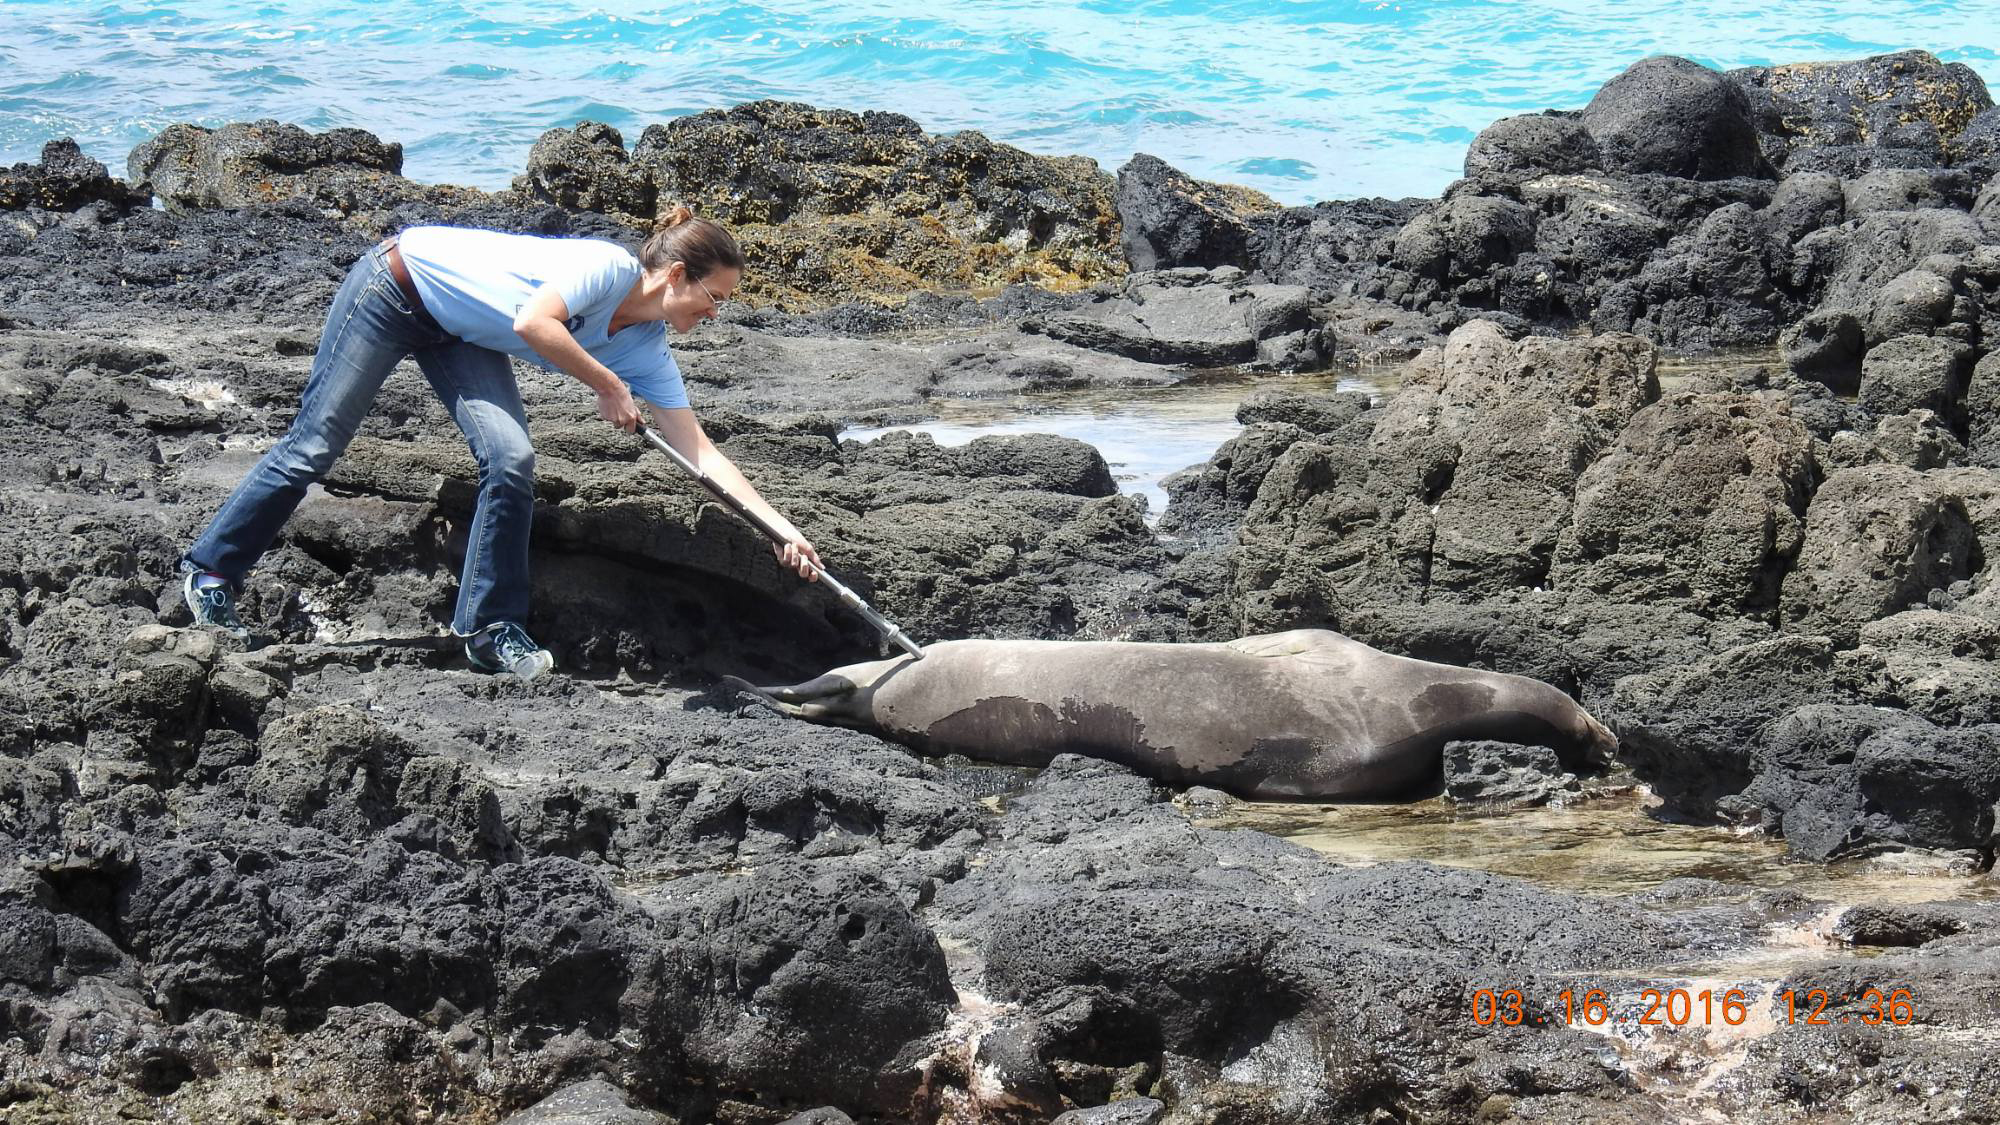 Image: Conserving Hawaiian Monk Seals Through Protections and Vaccinations